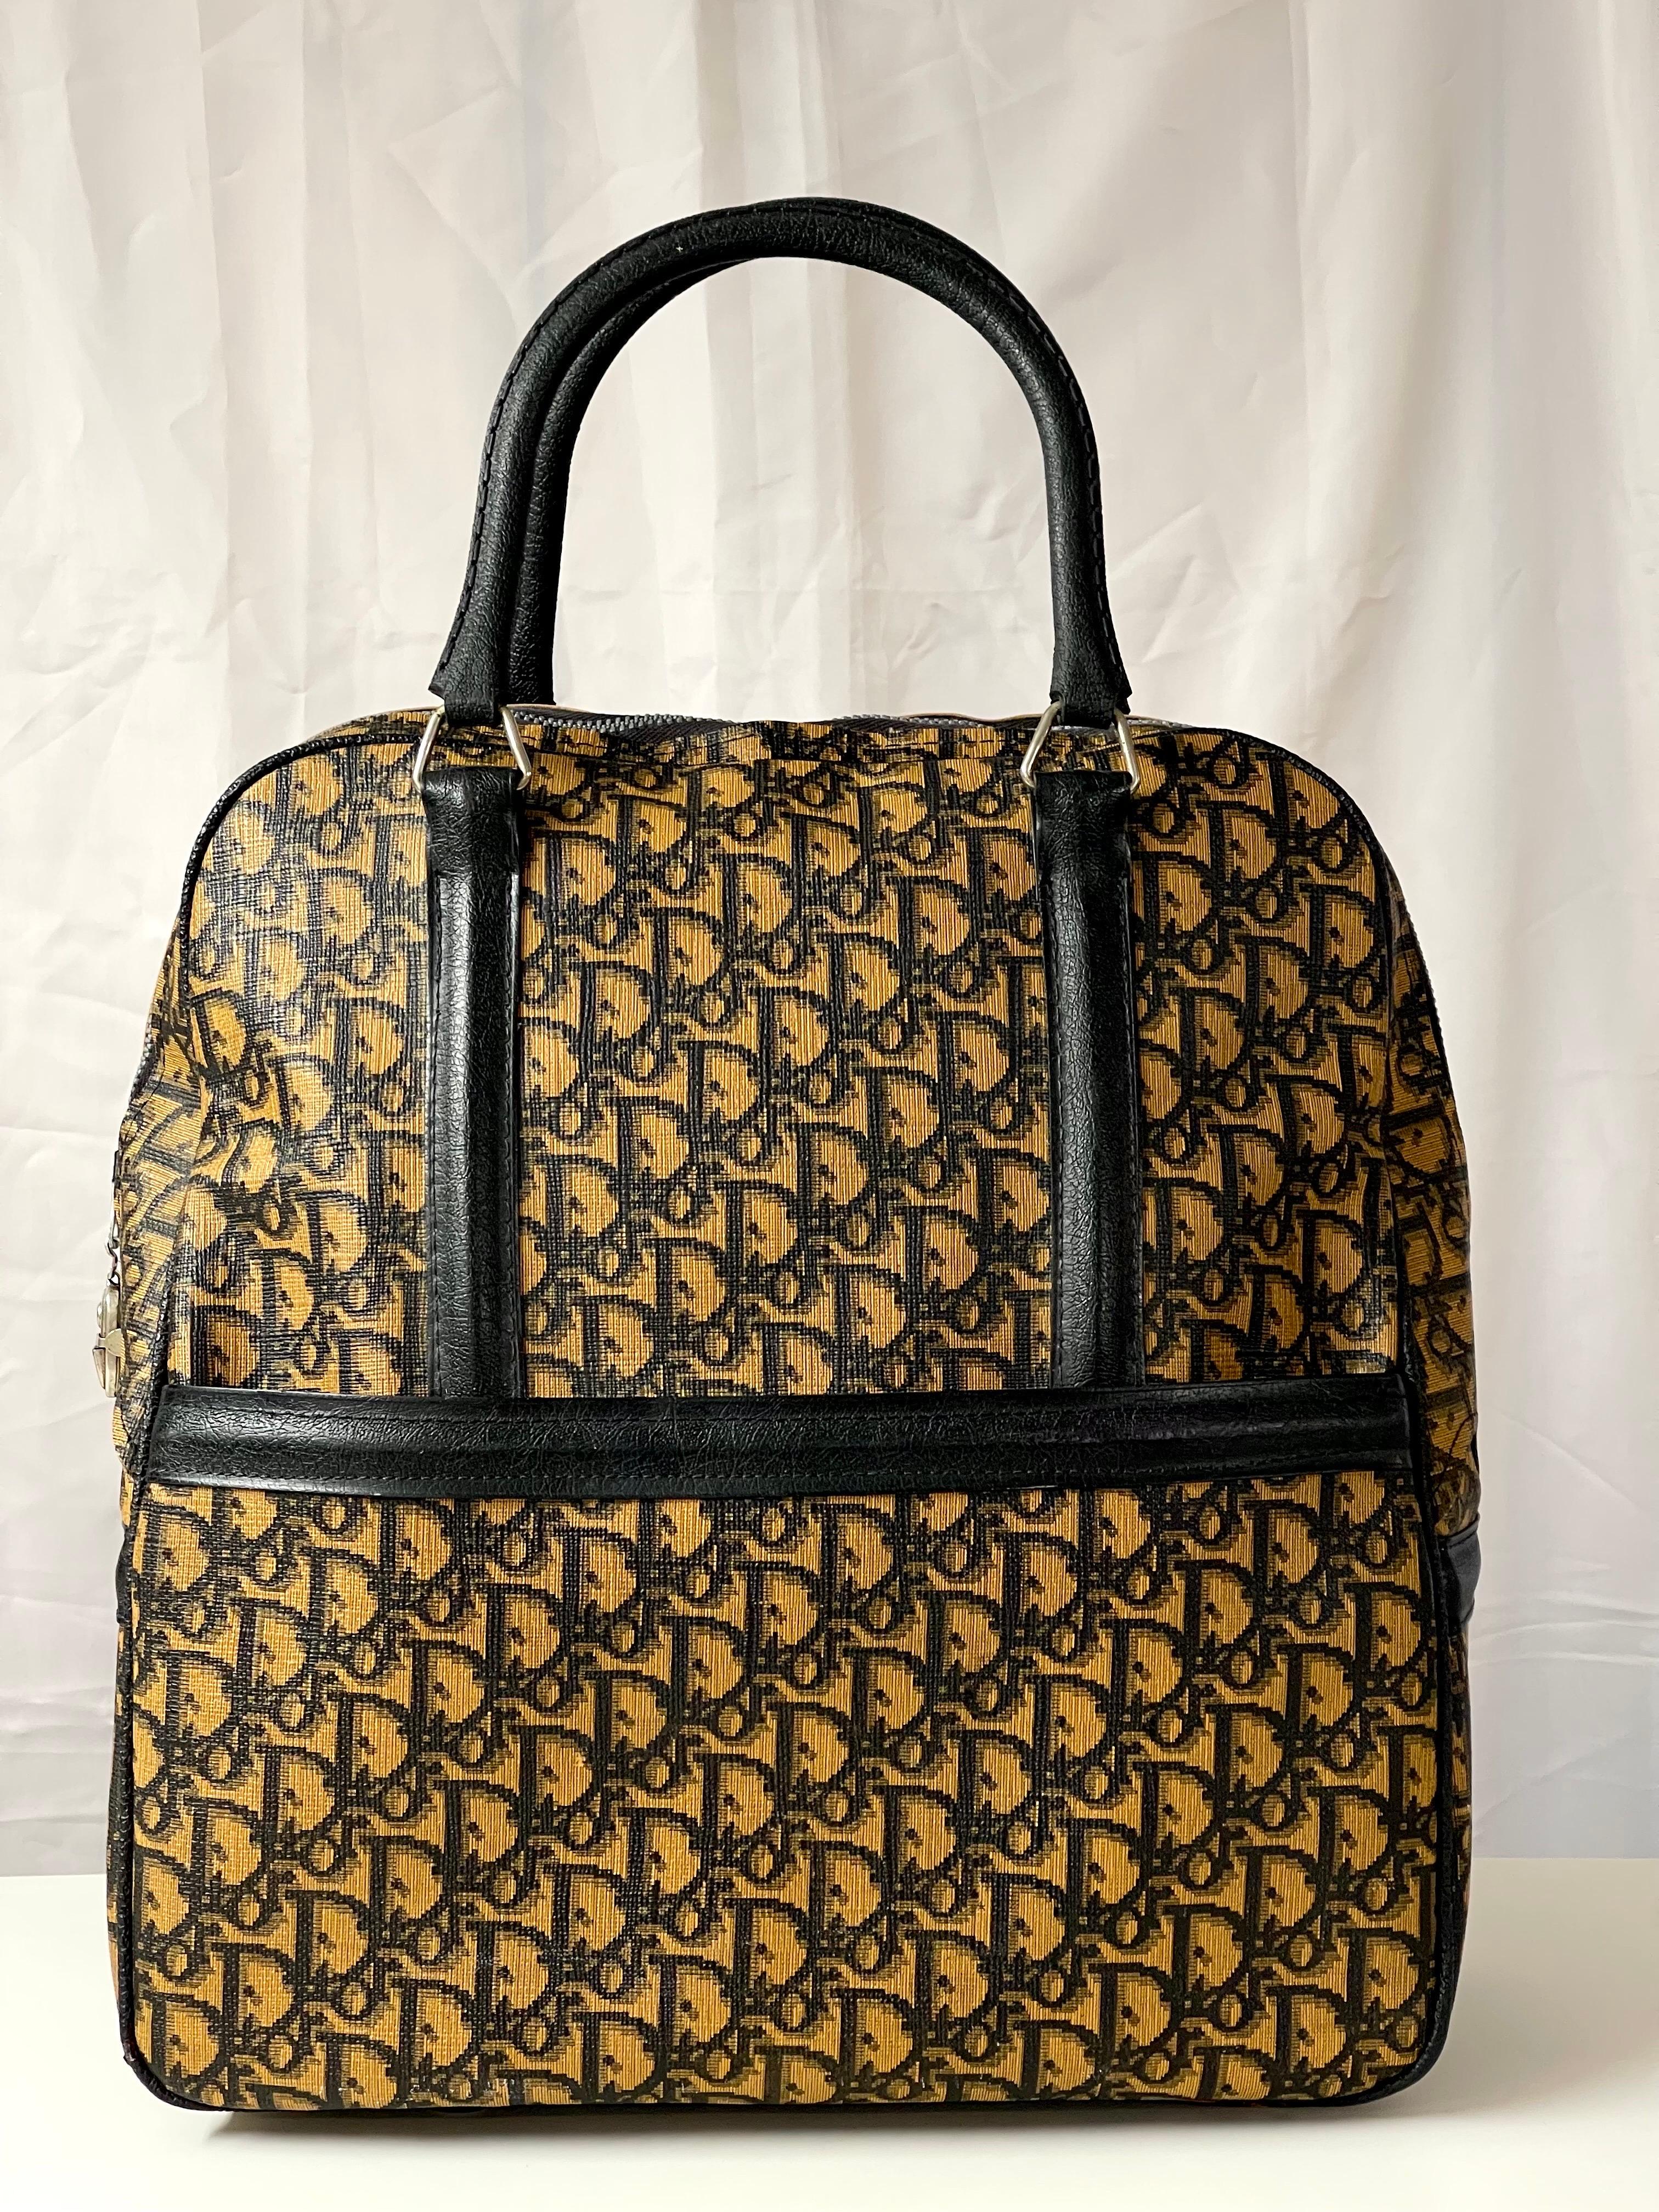 Rare Early Christian Dior Monogrammed Bowling Bag. Iconic design with the classic trotter pattern. Large round oversized bag with designer label plates. Original condition. No repairs. 
Interior Christian Dior name throughout interior fabric. See